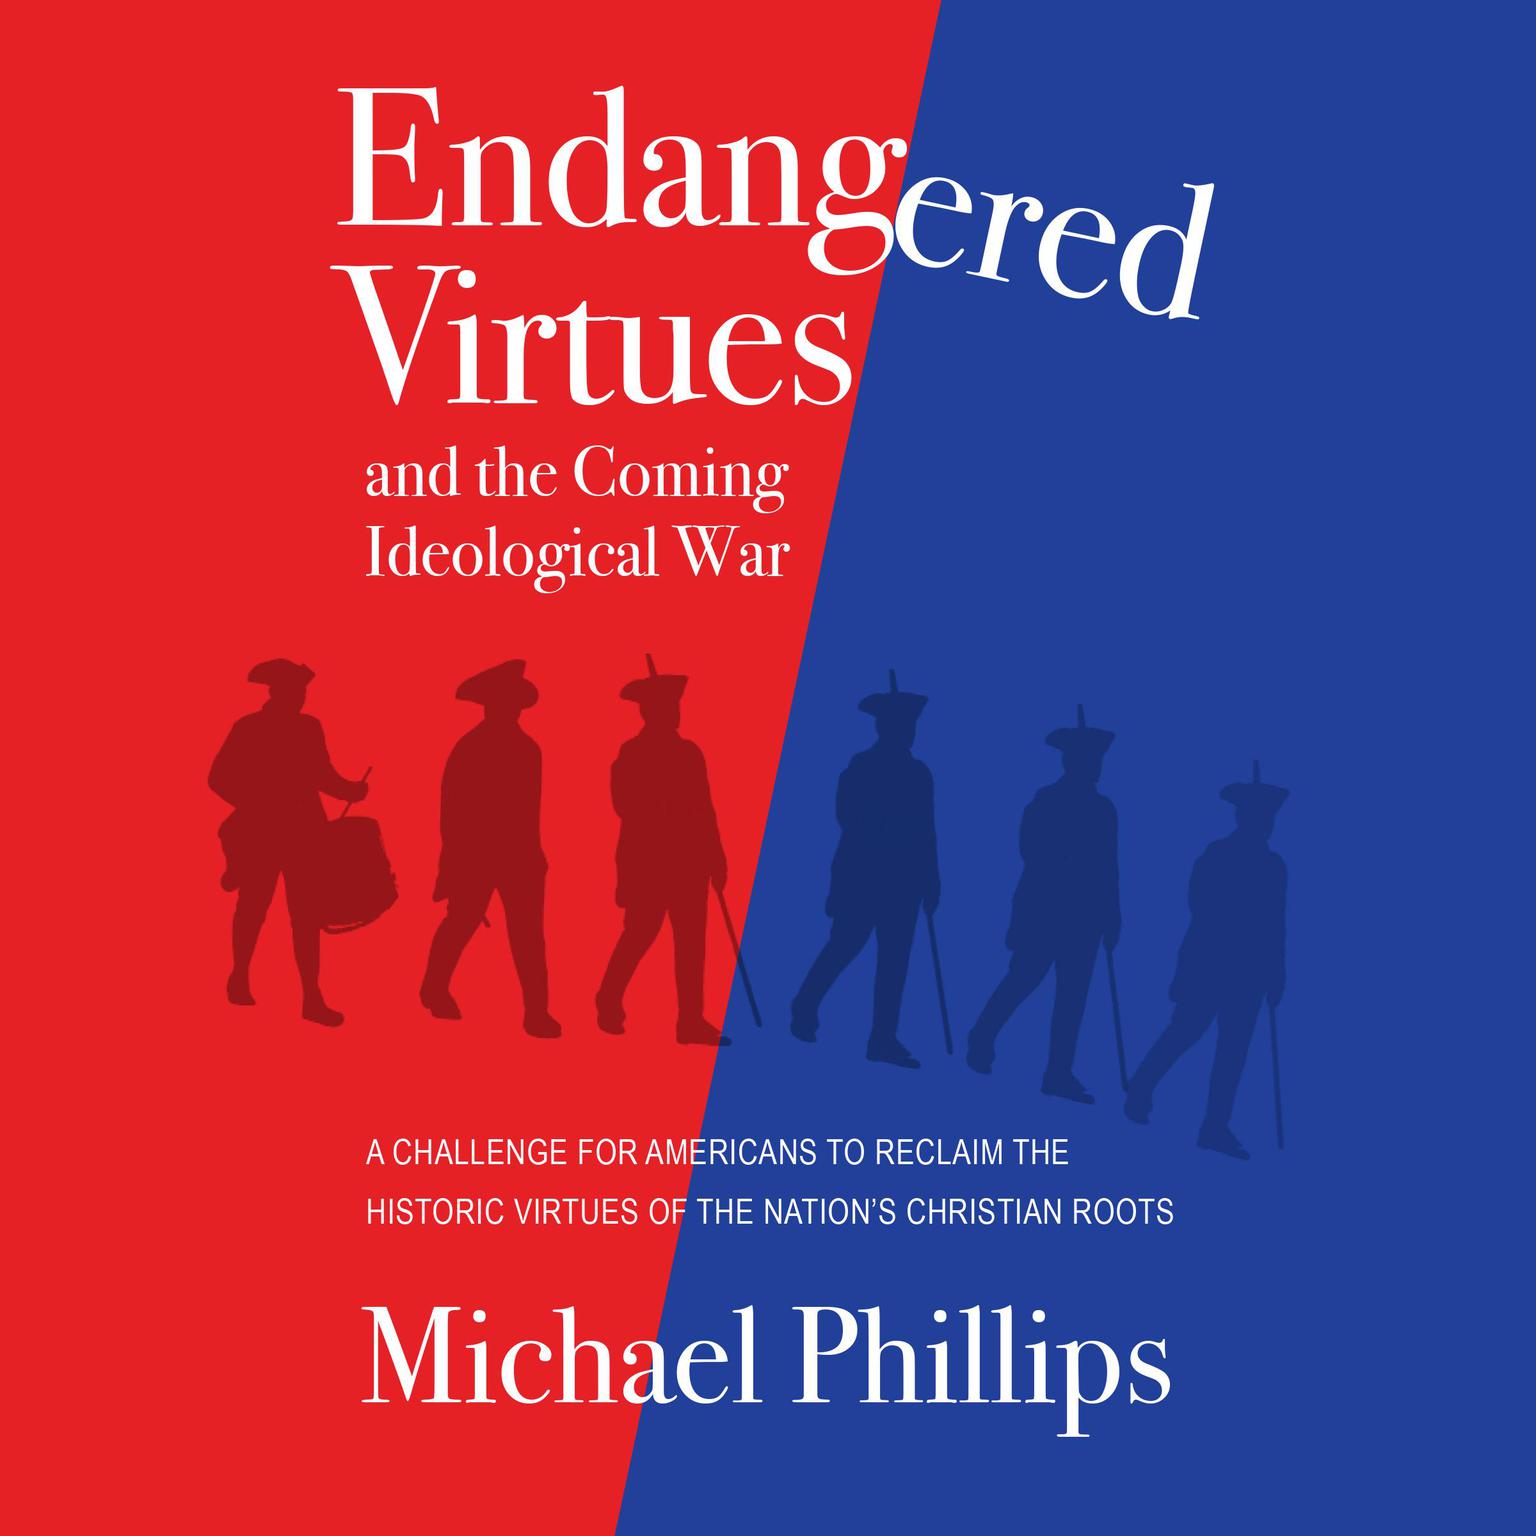 Endangered Virtues and the Coming Ideological War: A Challenge for Americans to Reclaim the Historic Virtues of the Nations Christian Roots Audiobook, by Michael Phillips